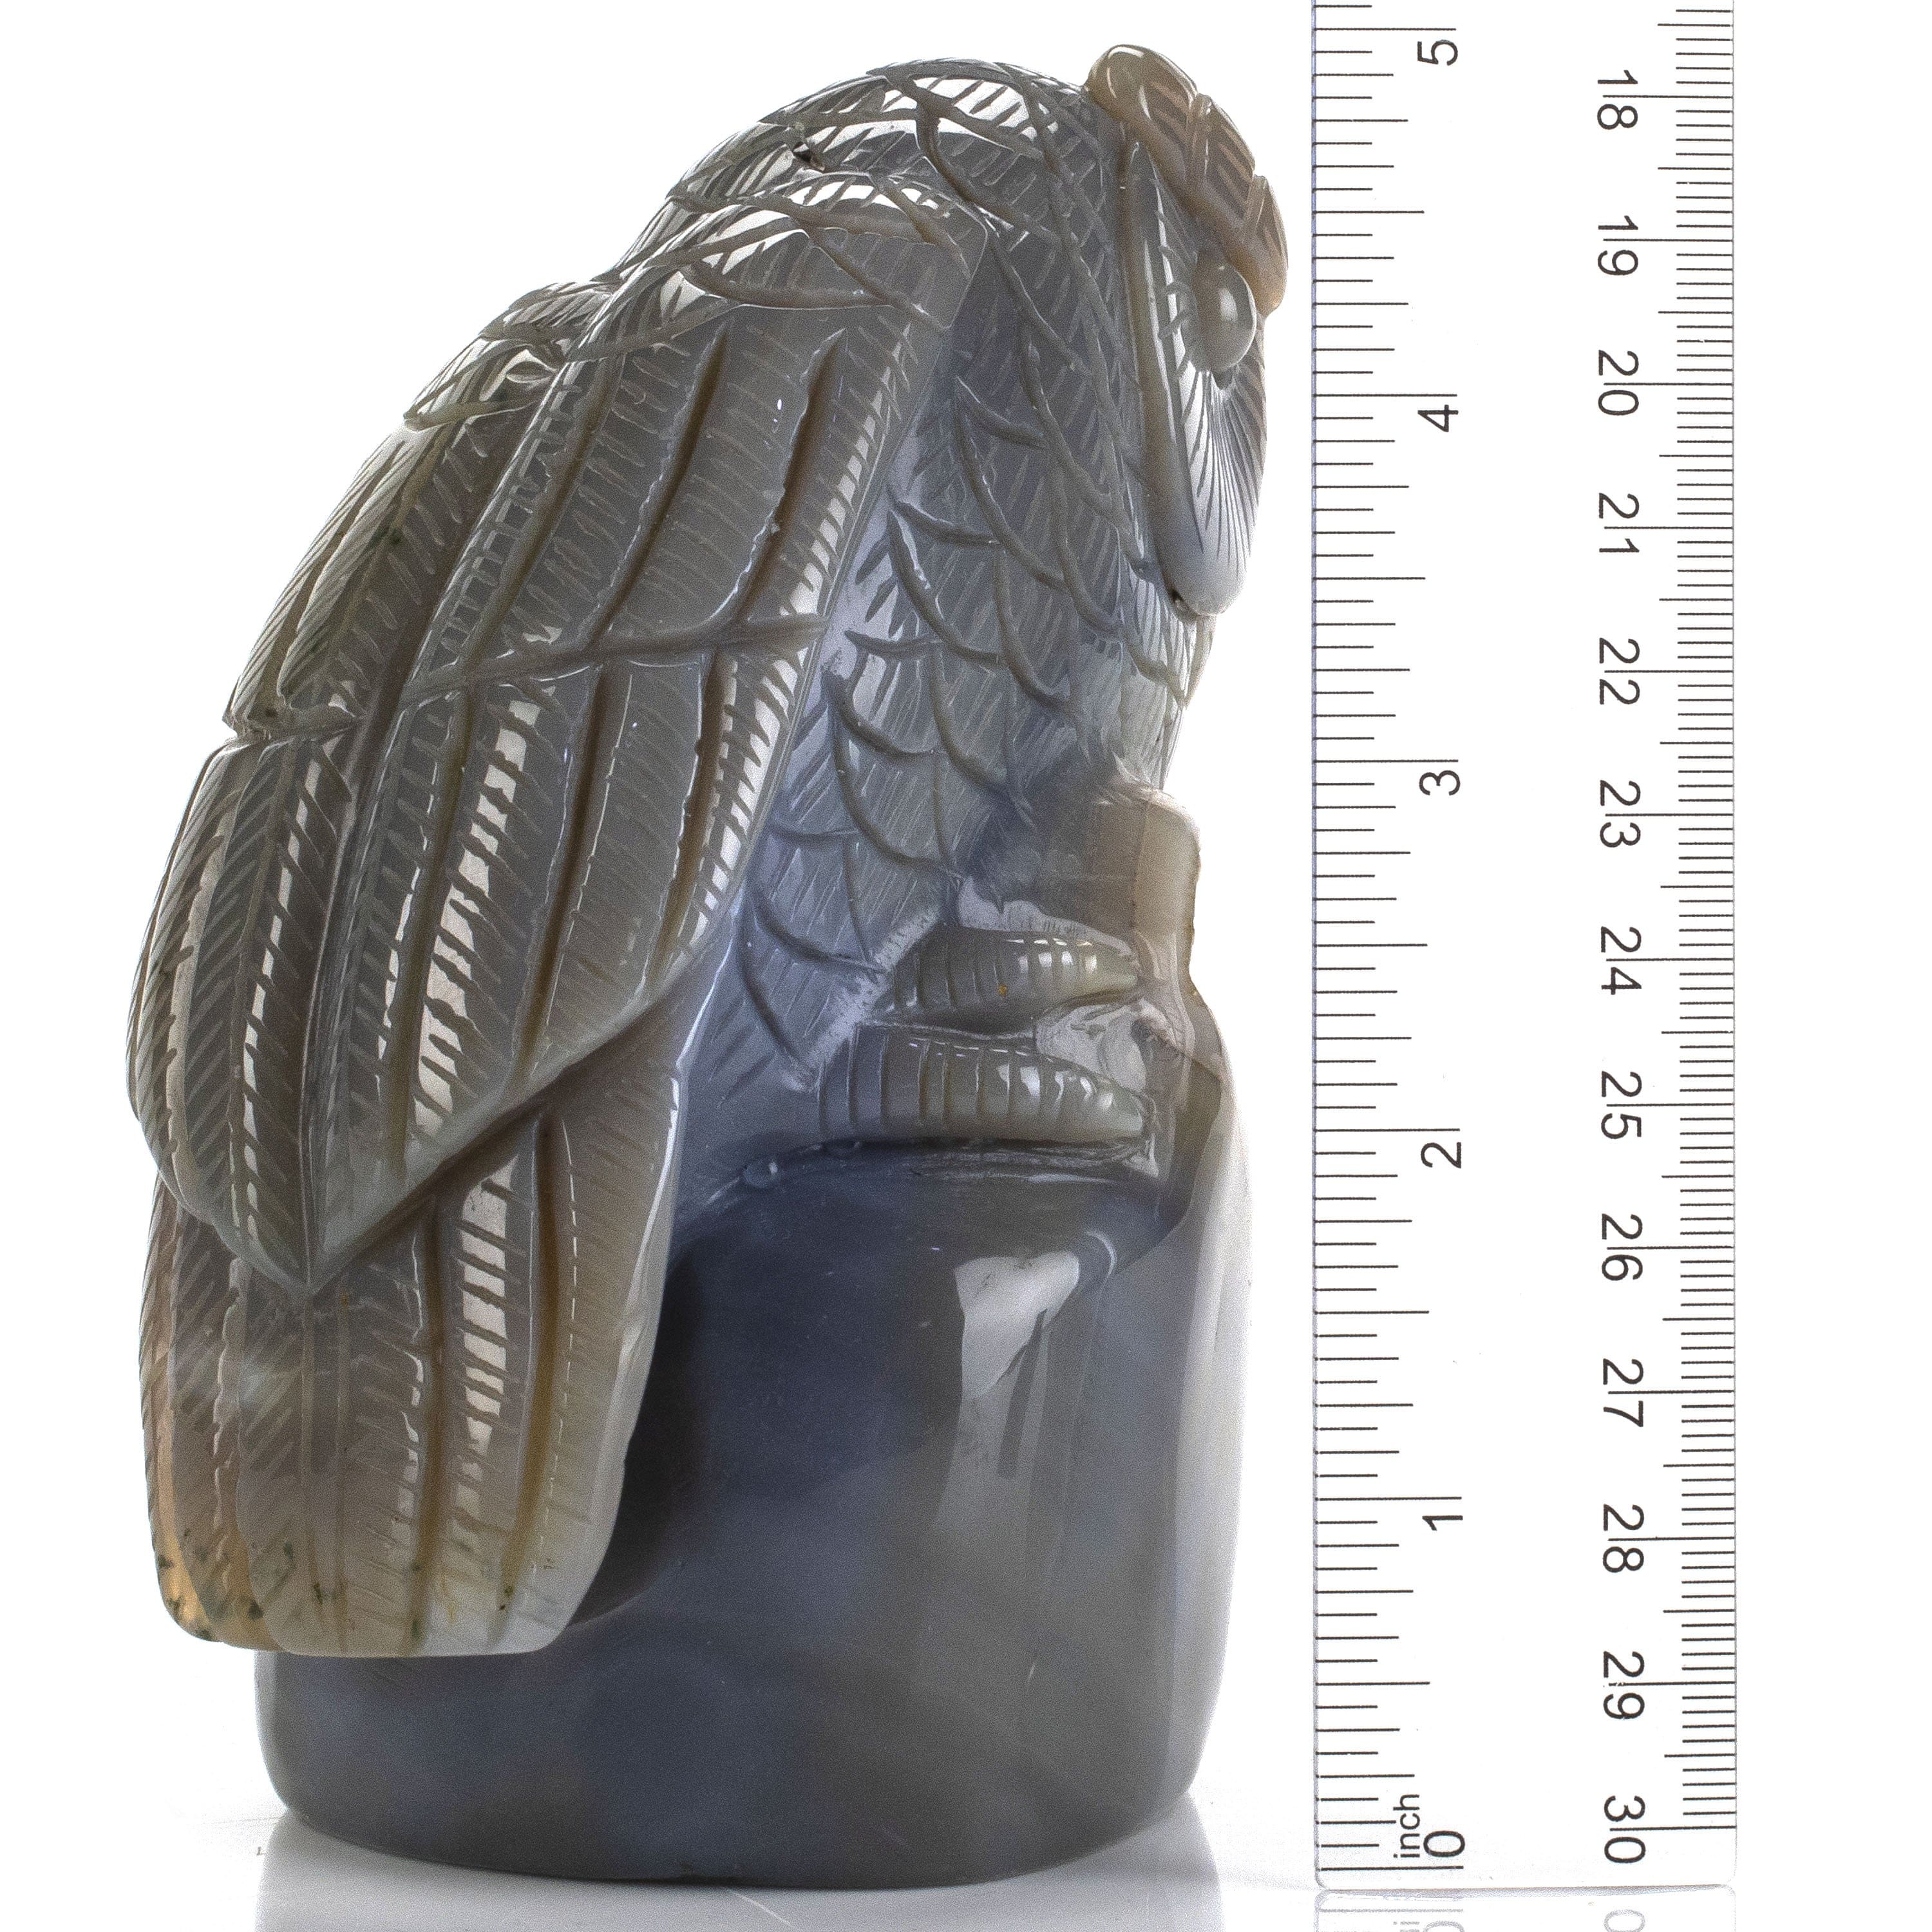 Kalifano Gemstone Carvings Natural Brazilian Blue Lace Agate Owl Animal Carving - 5 in CV386.001